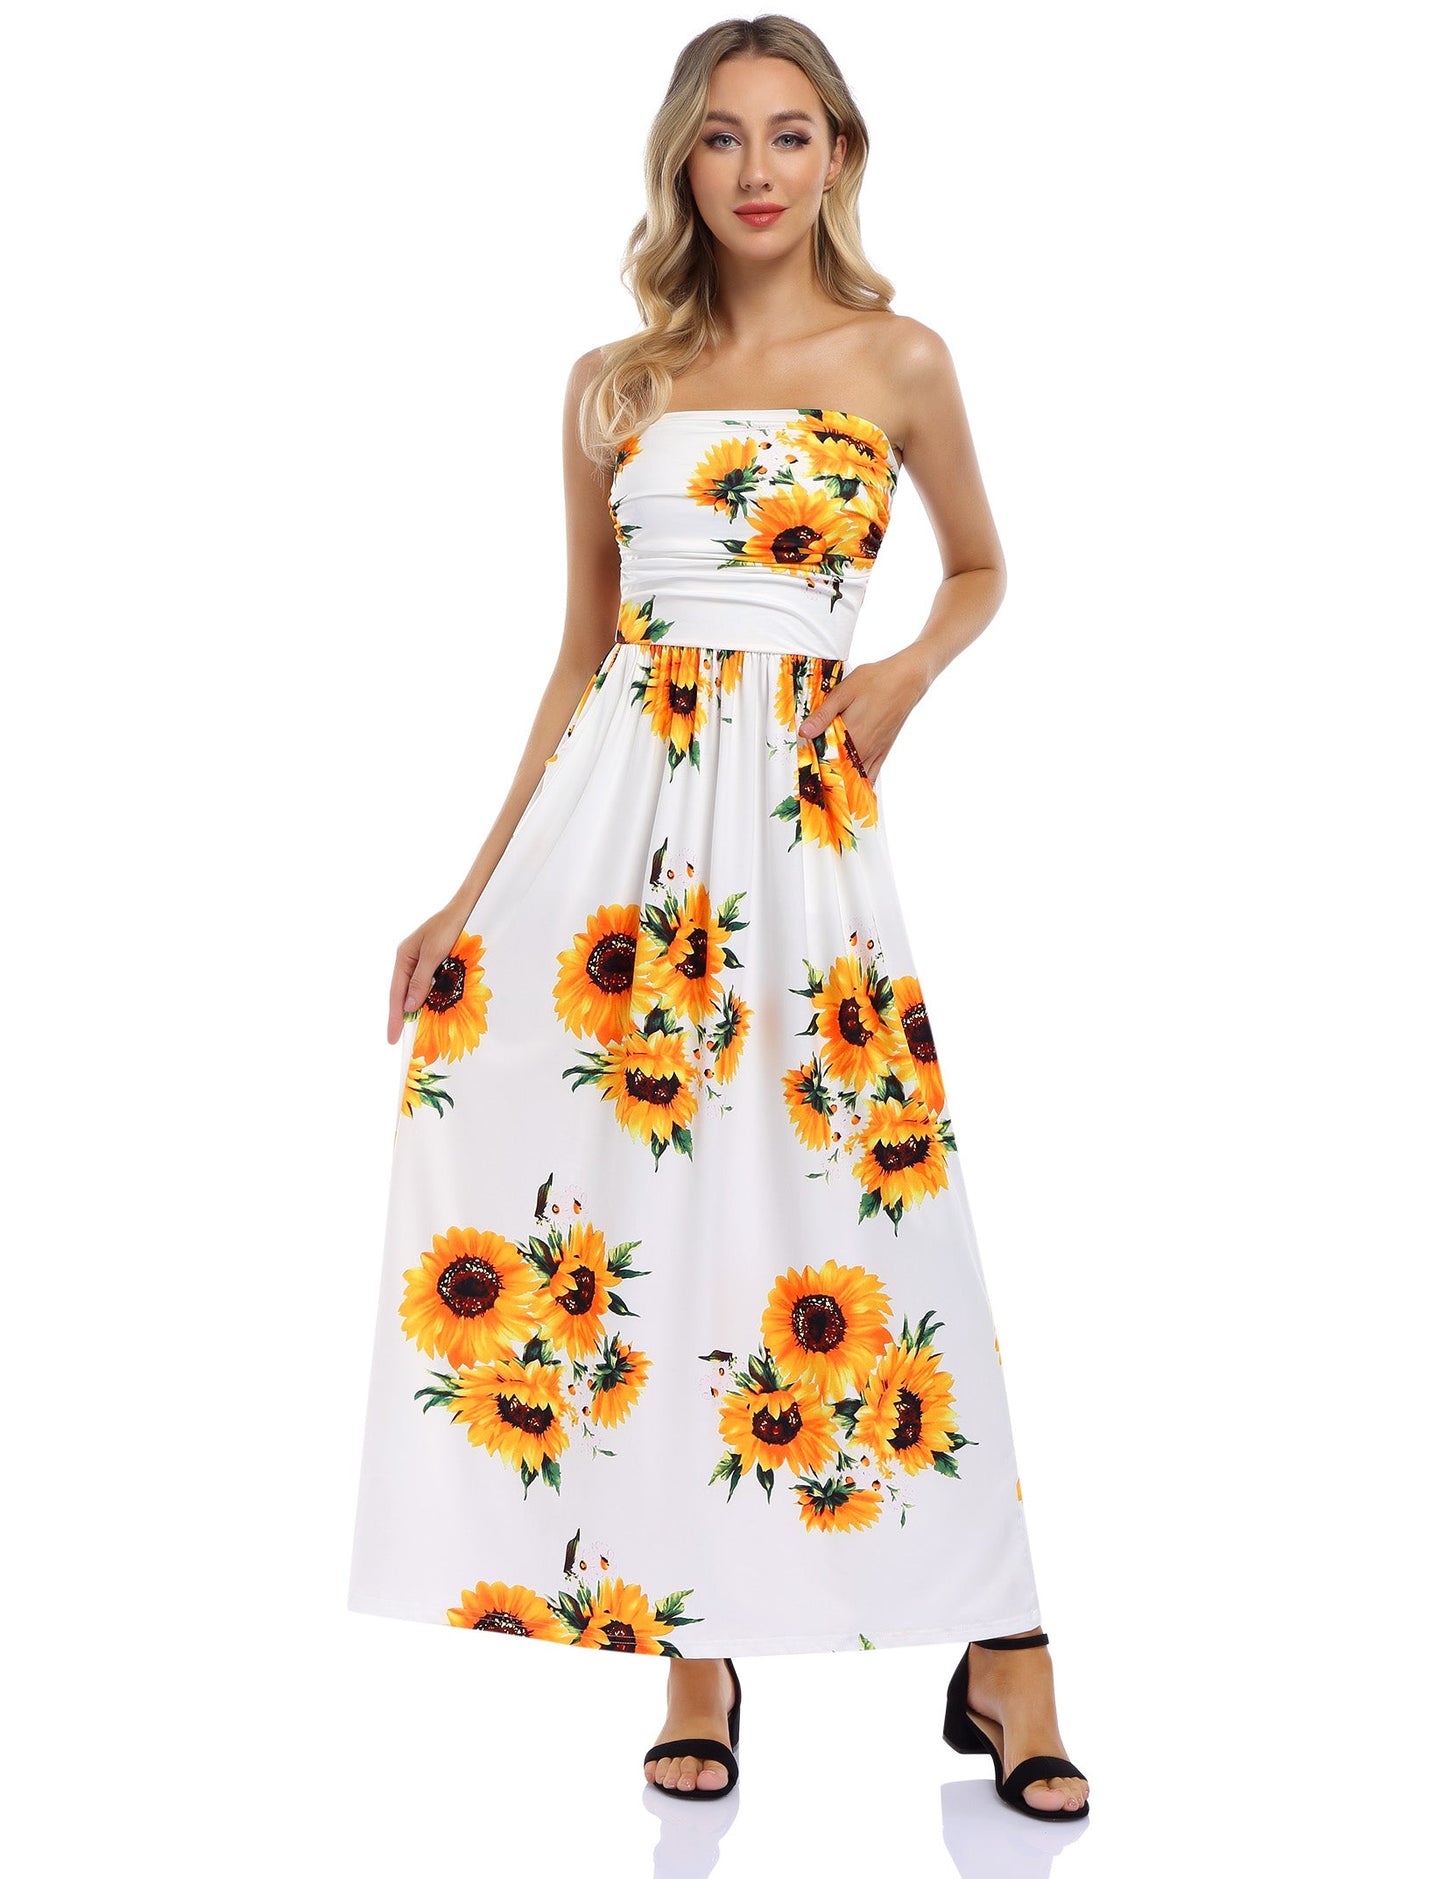 YESFASHION Women's Strapless Graceful Floral Party Maxi Long Dress Yelllow